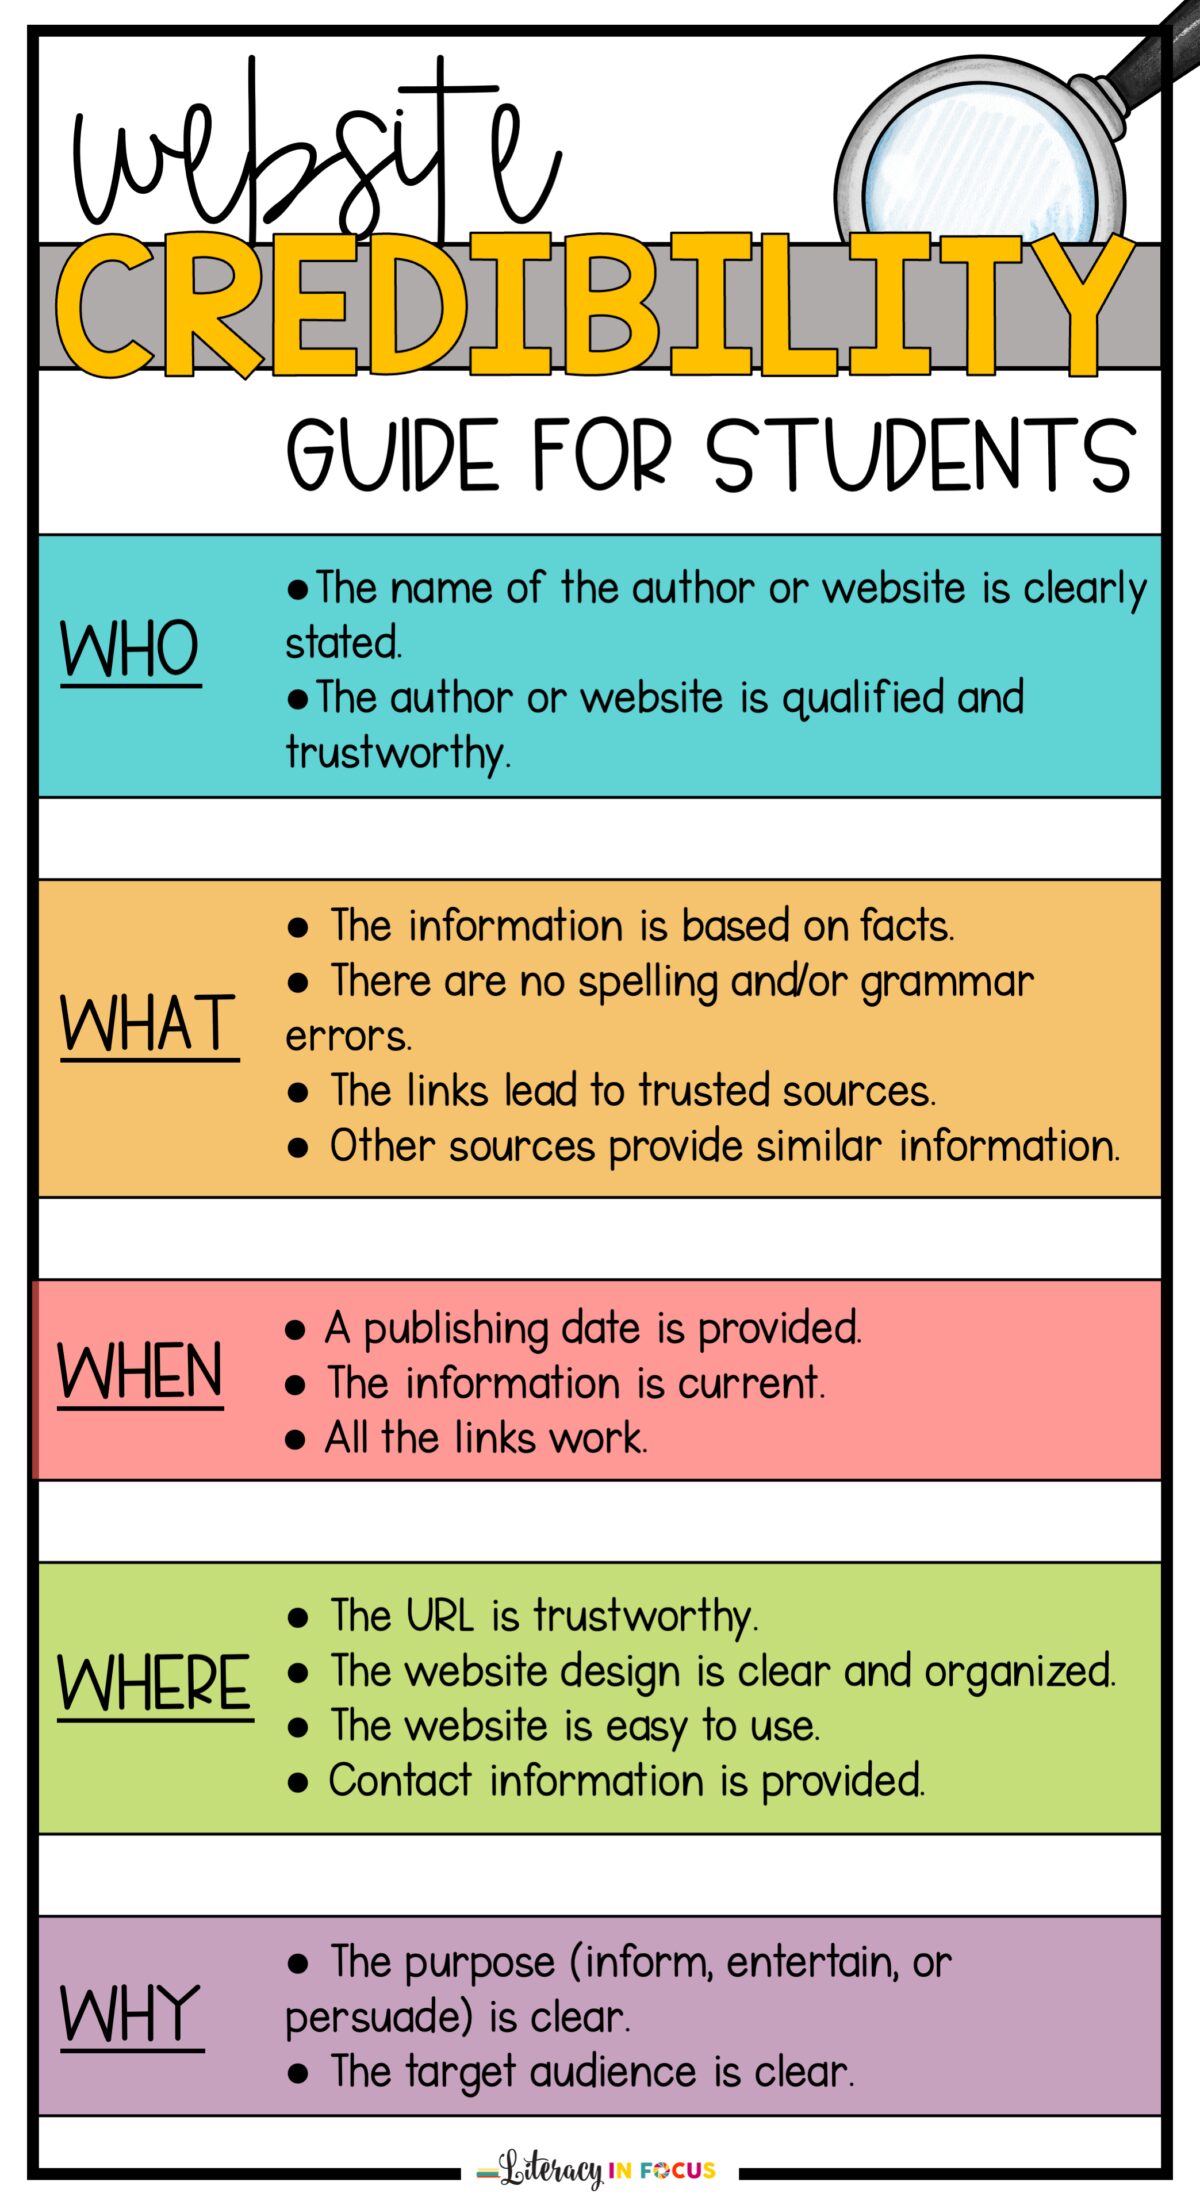 Website Credibility Guide for Students